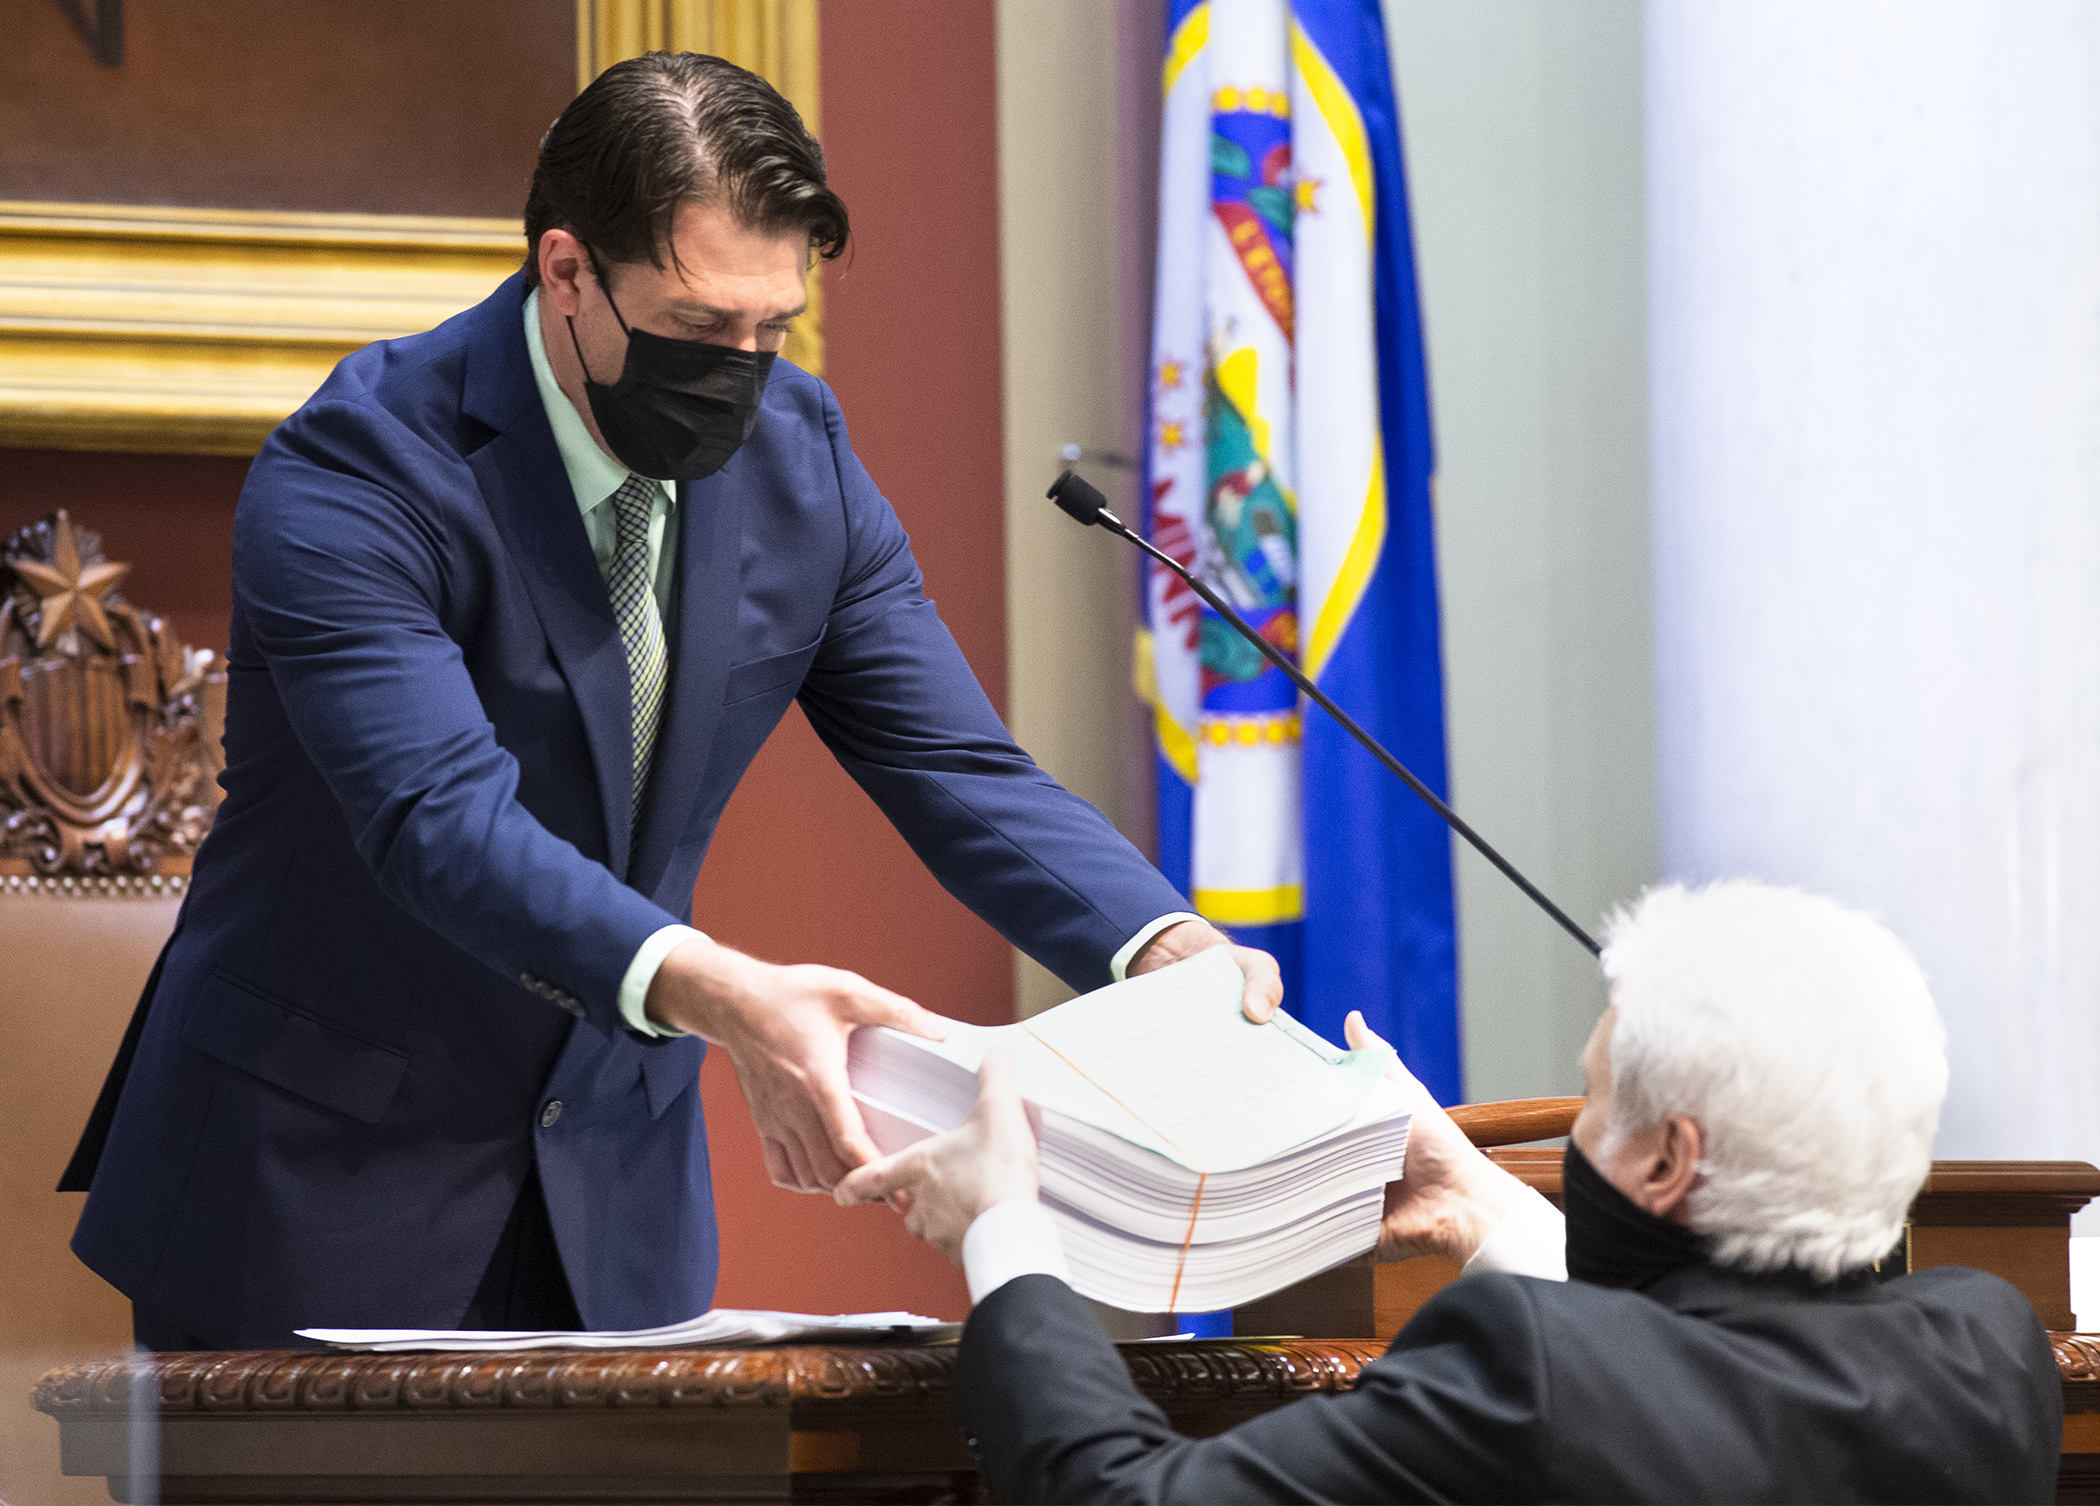 House Speaker Pro-Tempore Andrew Carlson hands the 970-page omnibus health and human services bill to Chief Clerk Pat Murphy at the beginning of floor debate April 26. Photo by Paul Battaglia